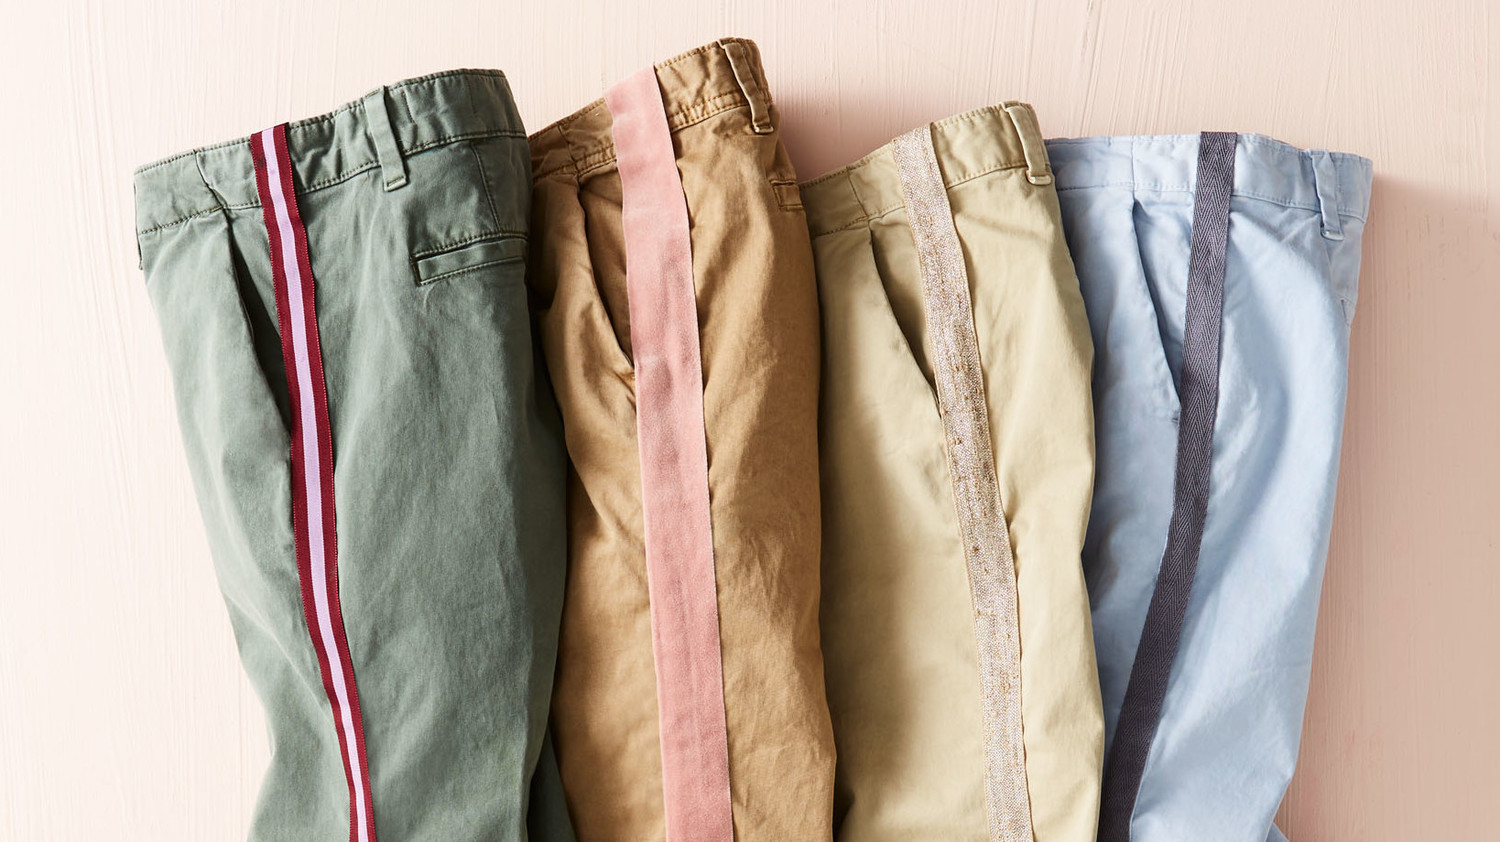 Now Is The Time For You To Know About The prAna Shorts